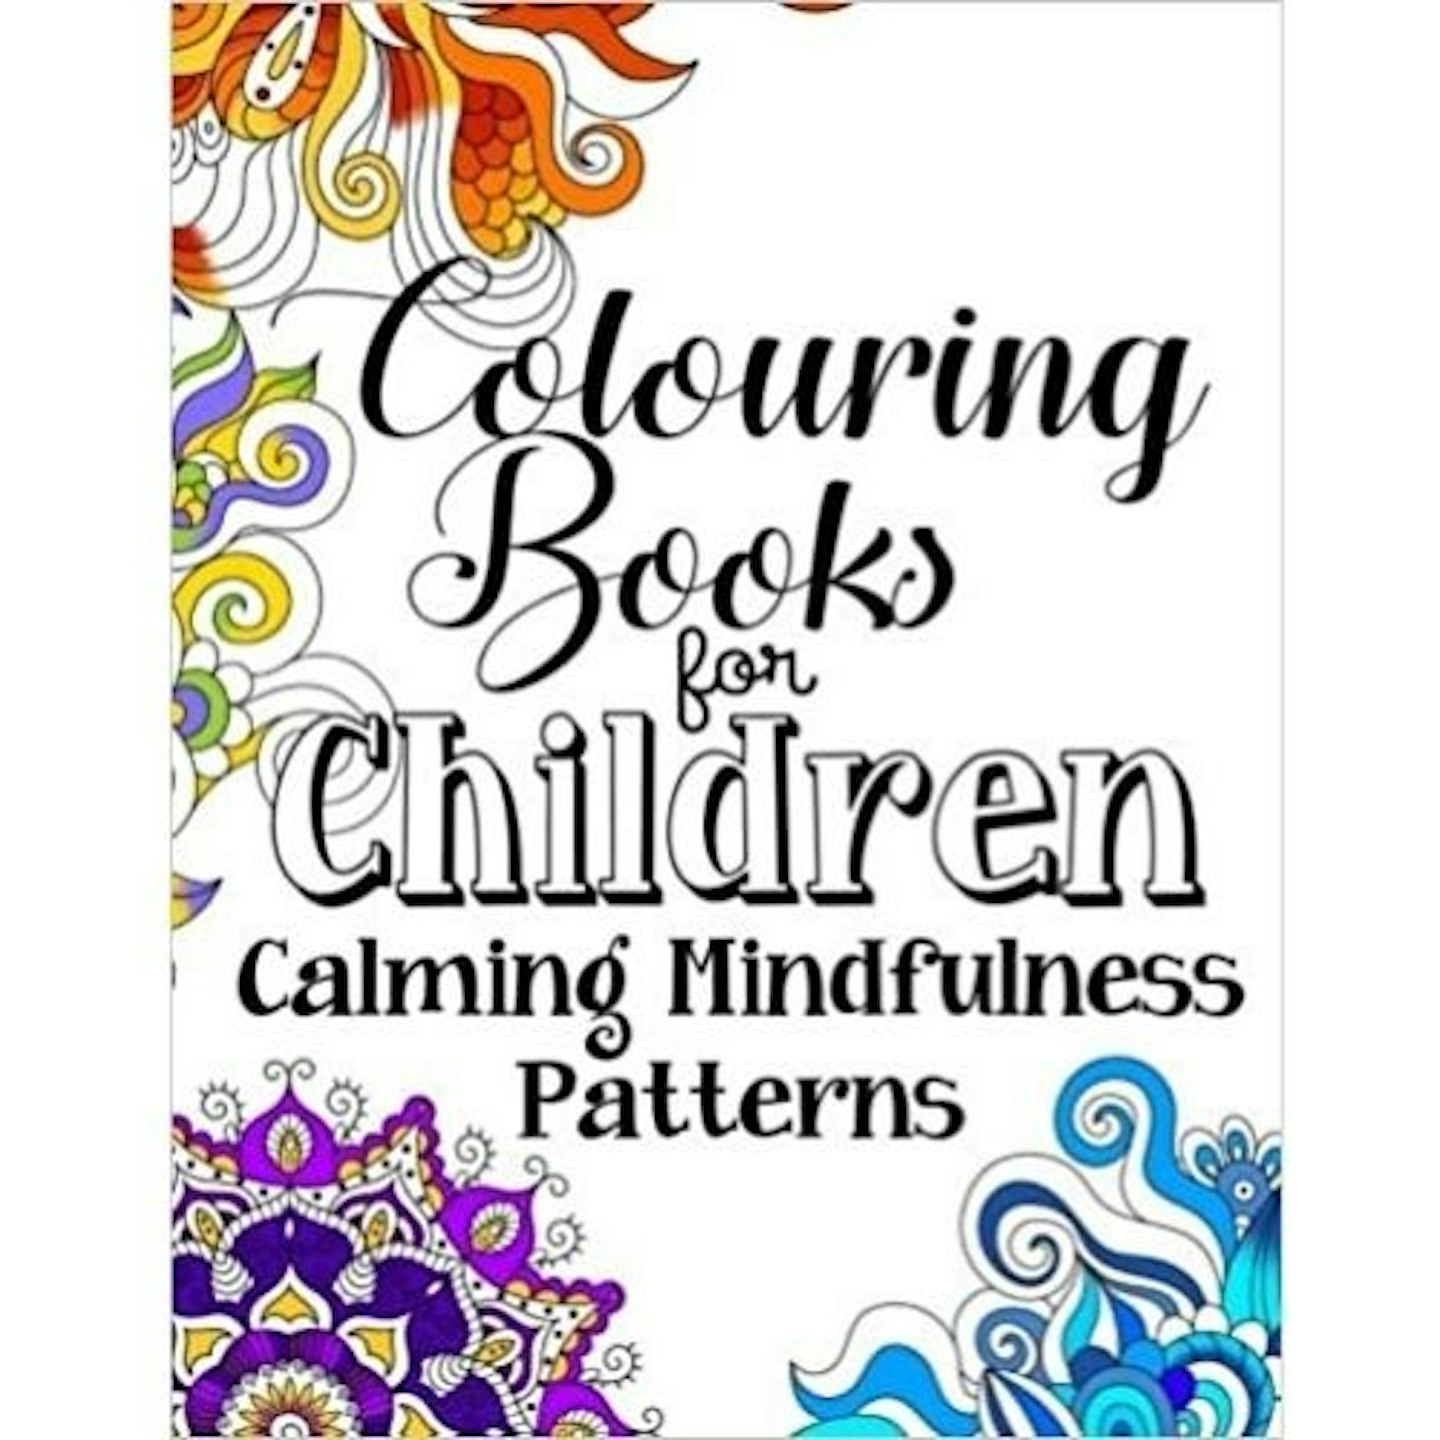 Colouring Books For Children Calming Mindfulness Patterns